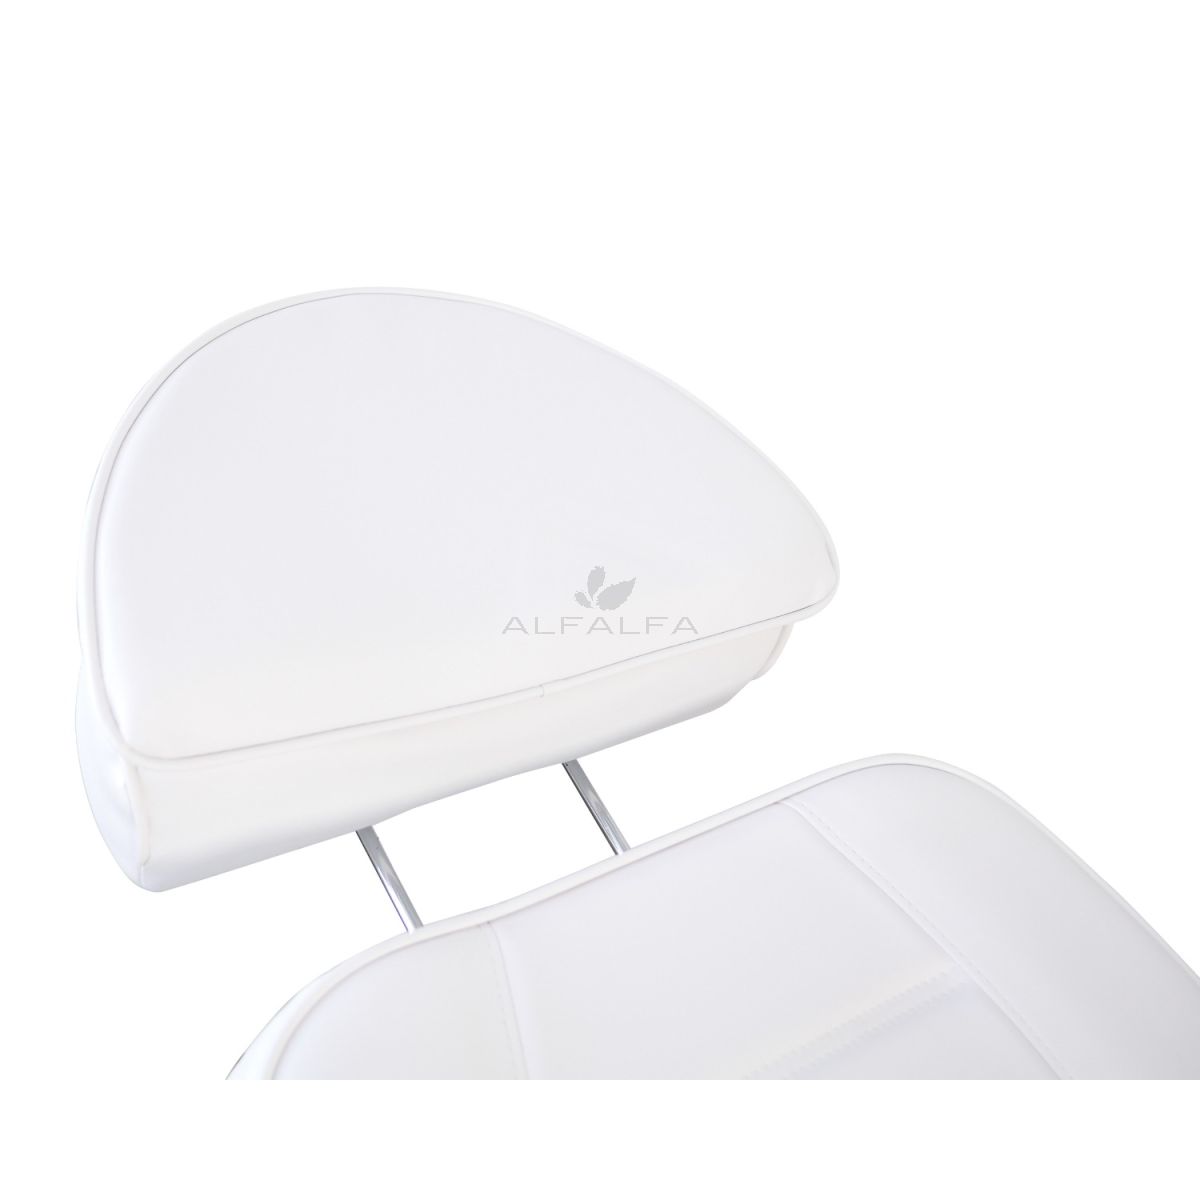 Facial Beauty Chair & Wooden Armrests w/ 3 Motors - White